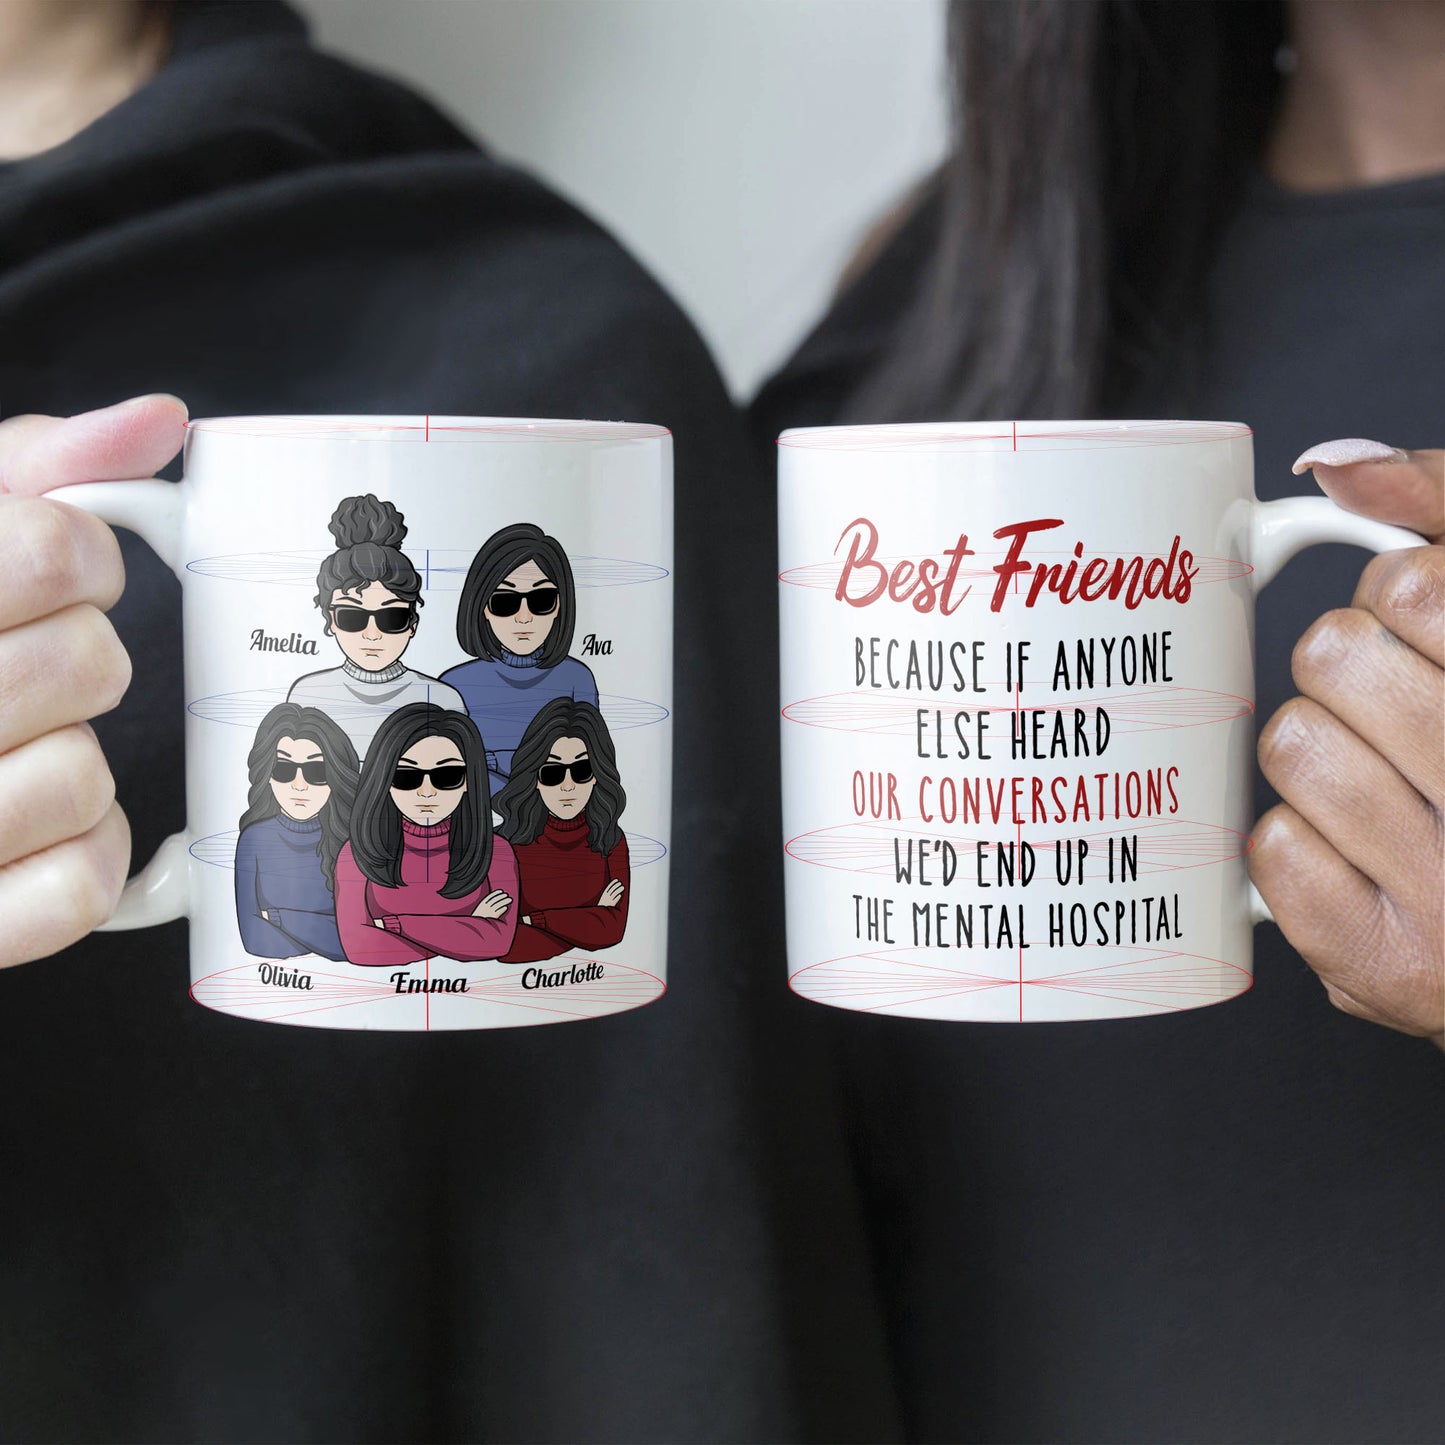 We'd End Up In The Mental Hospital - Personalized Mug - Birthday & Christmas Gift For BFF, Besties, Best Friends, Sisters